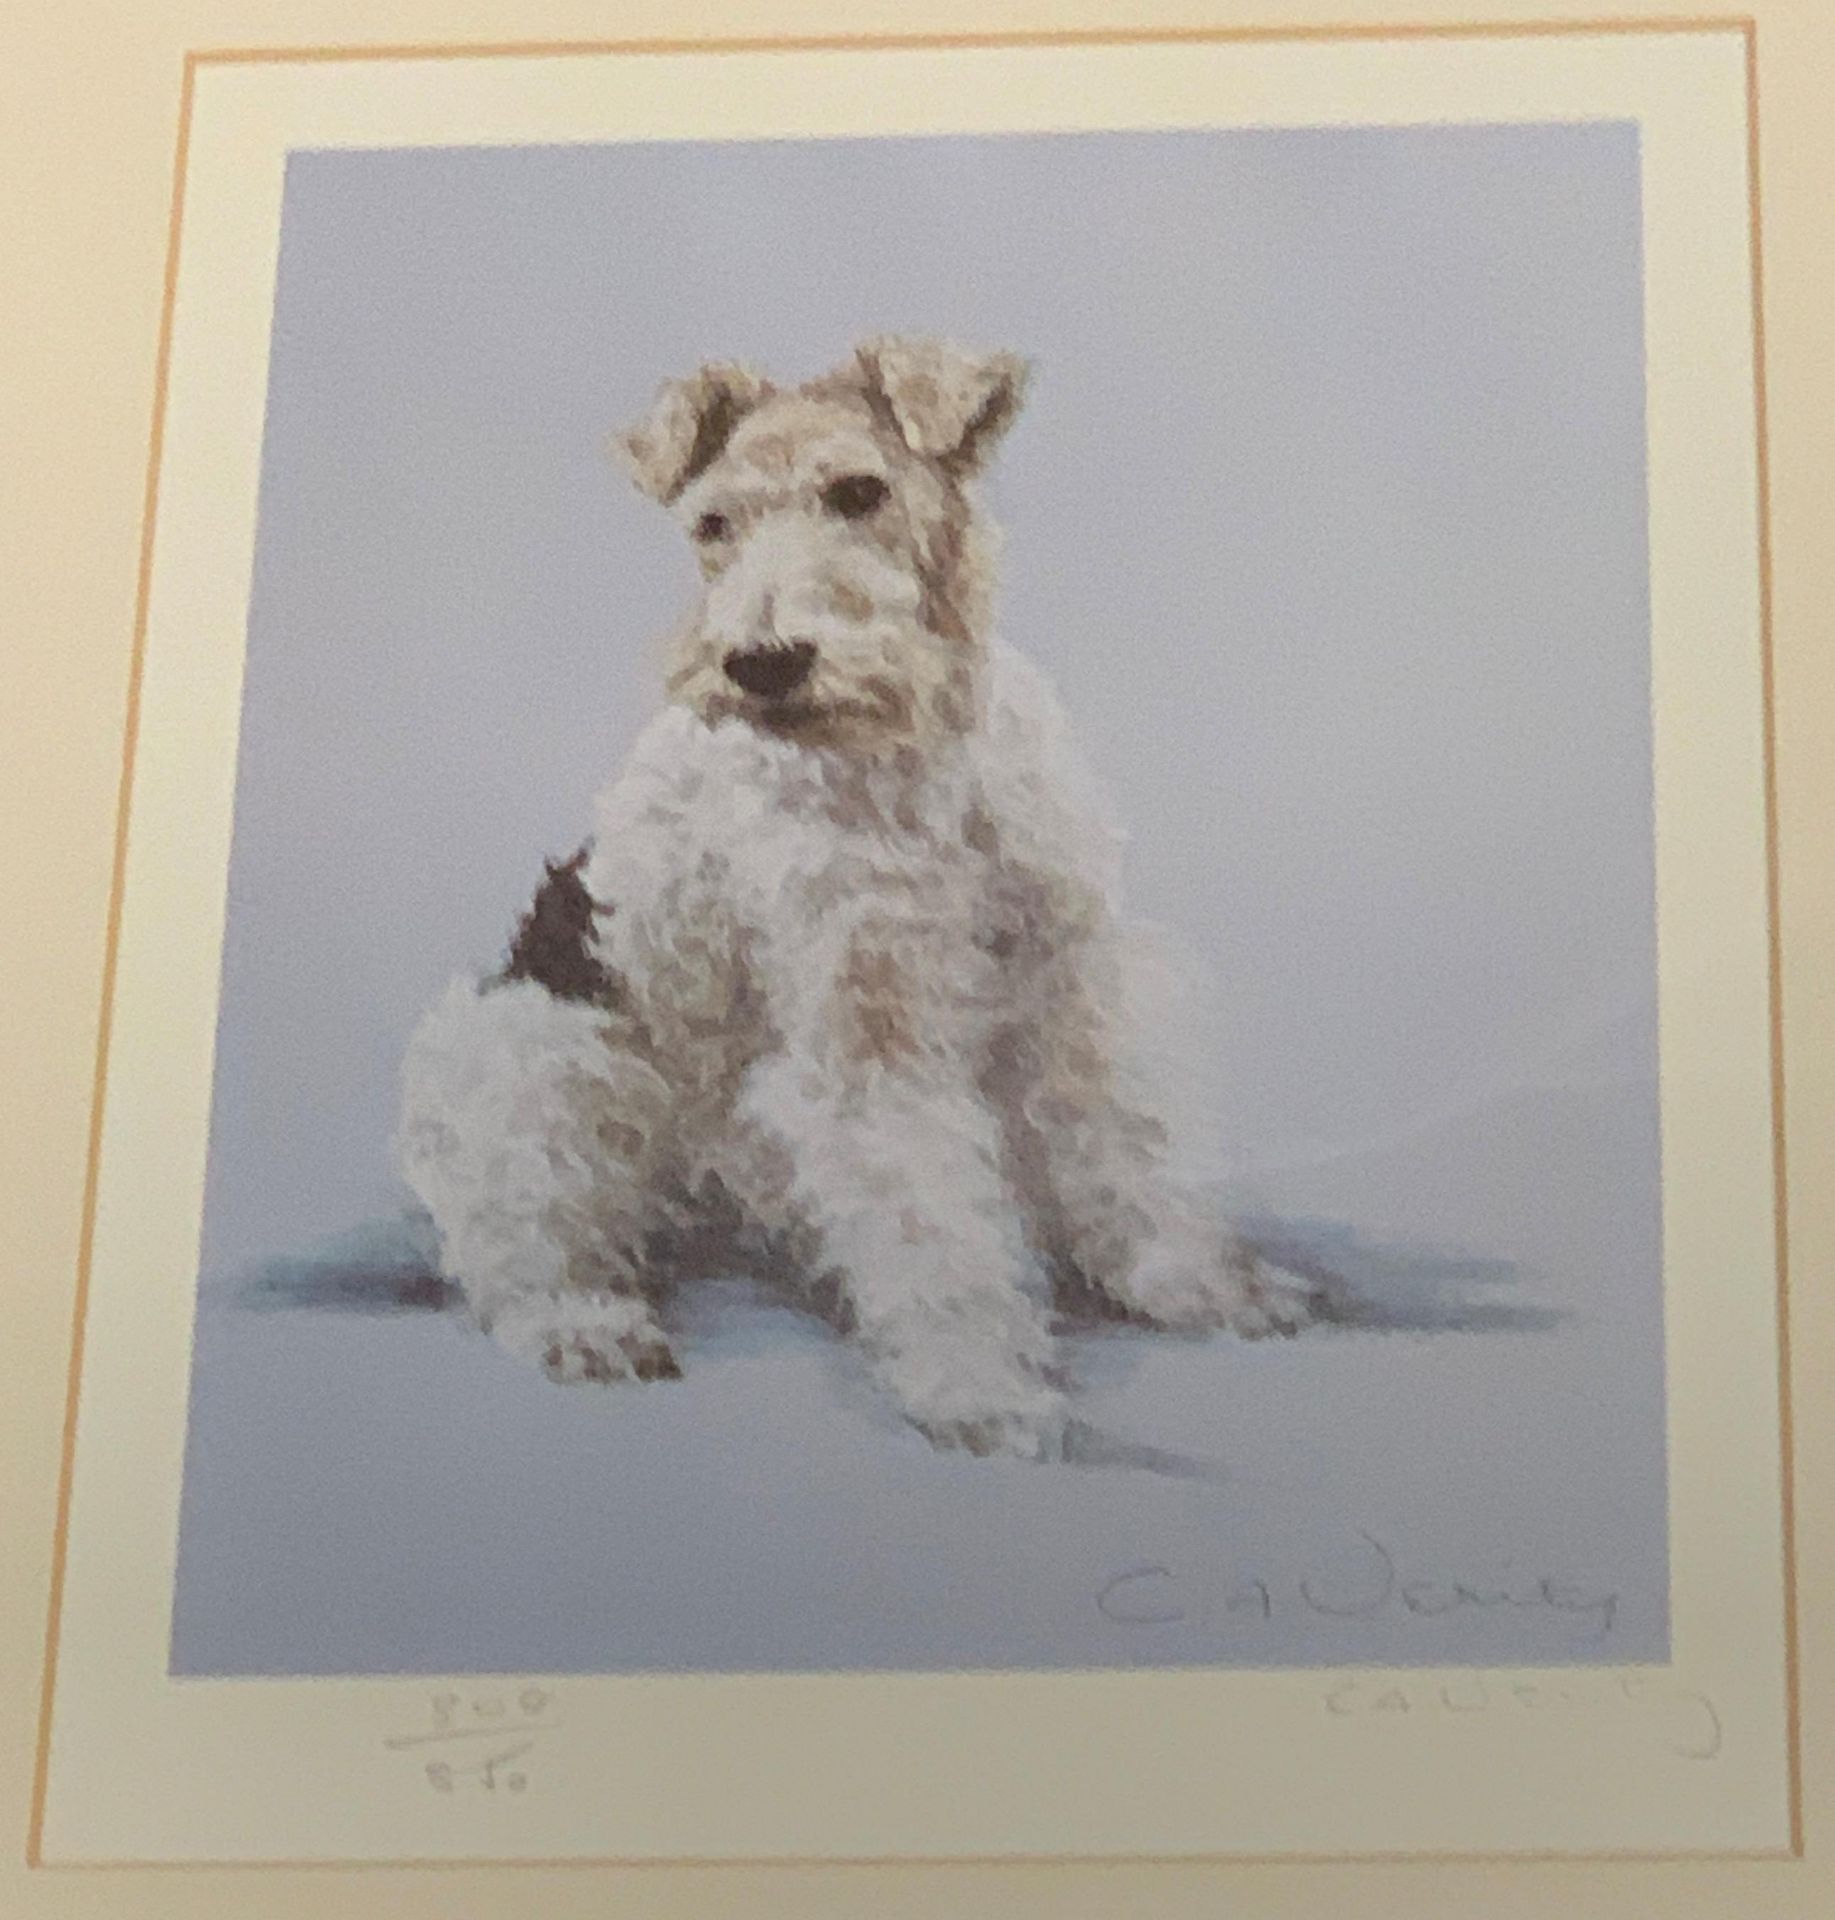 C. A. Verity framed Ltd Edition print of a Wire Hair Fox Terrier 22 x 17cm signed in pencil and No. - Image 3 of 3